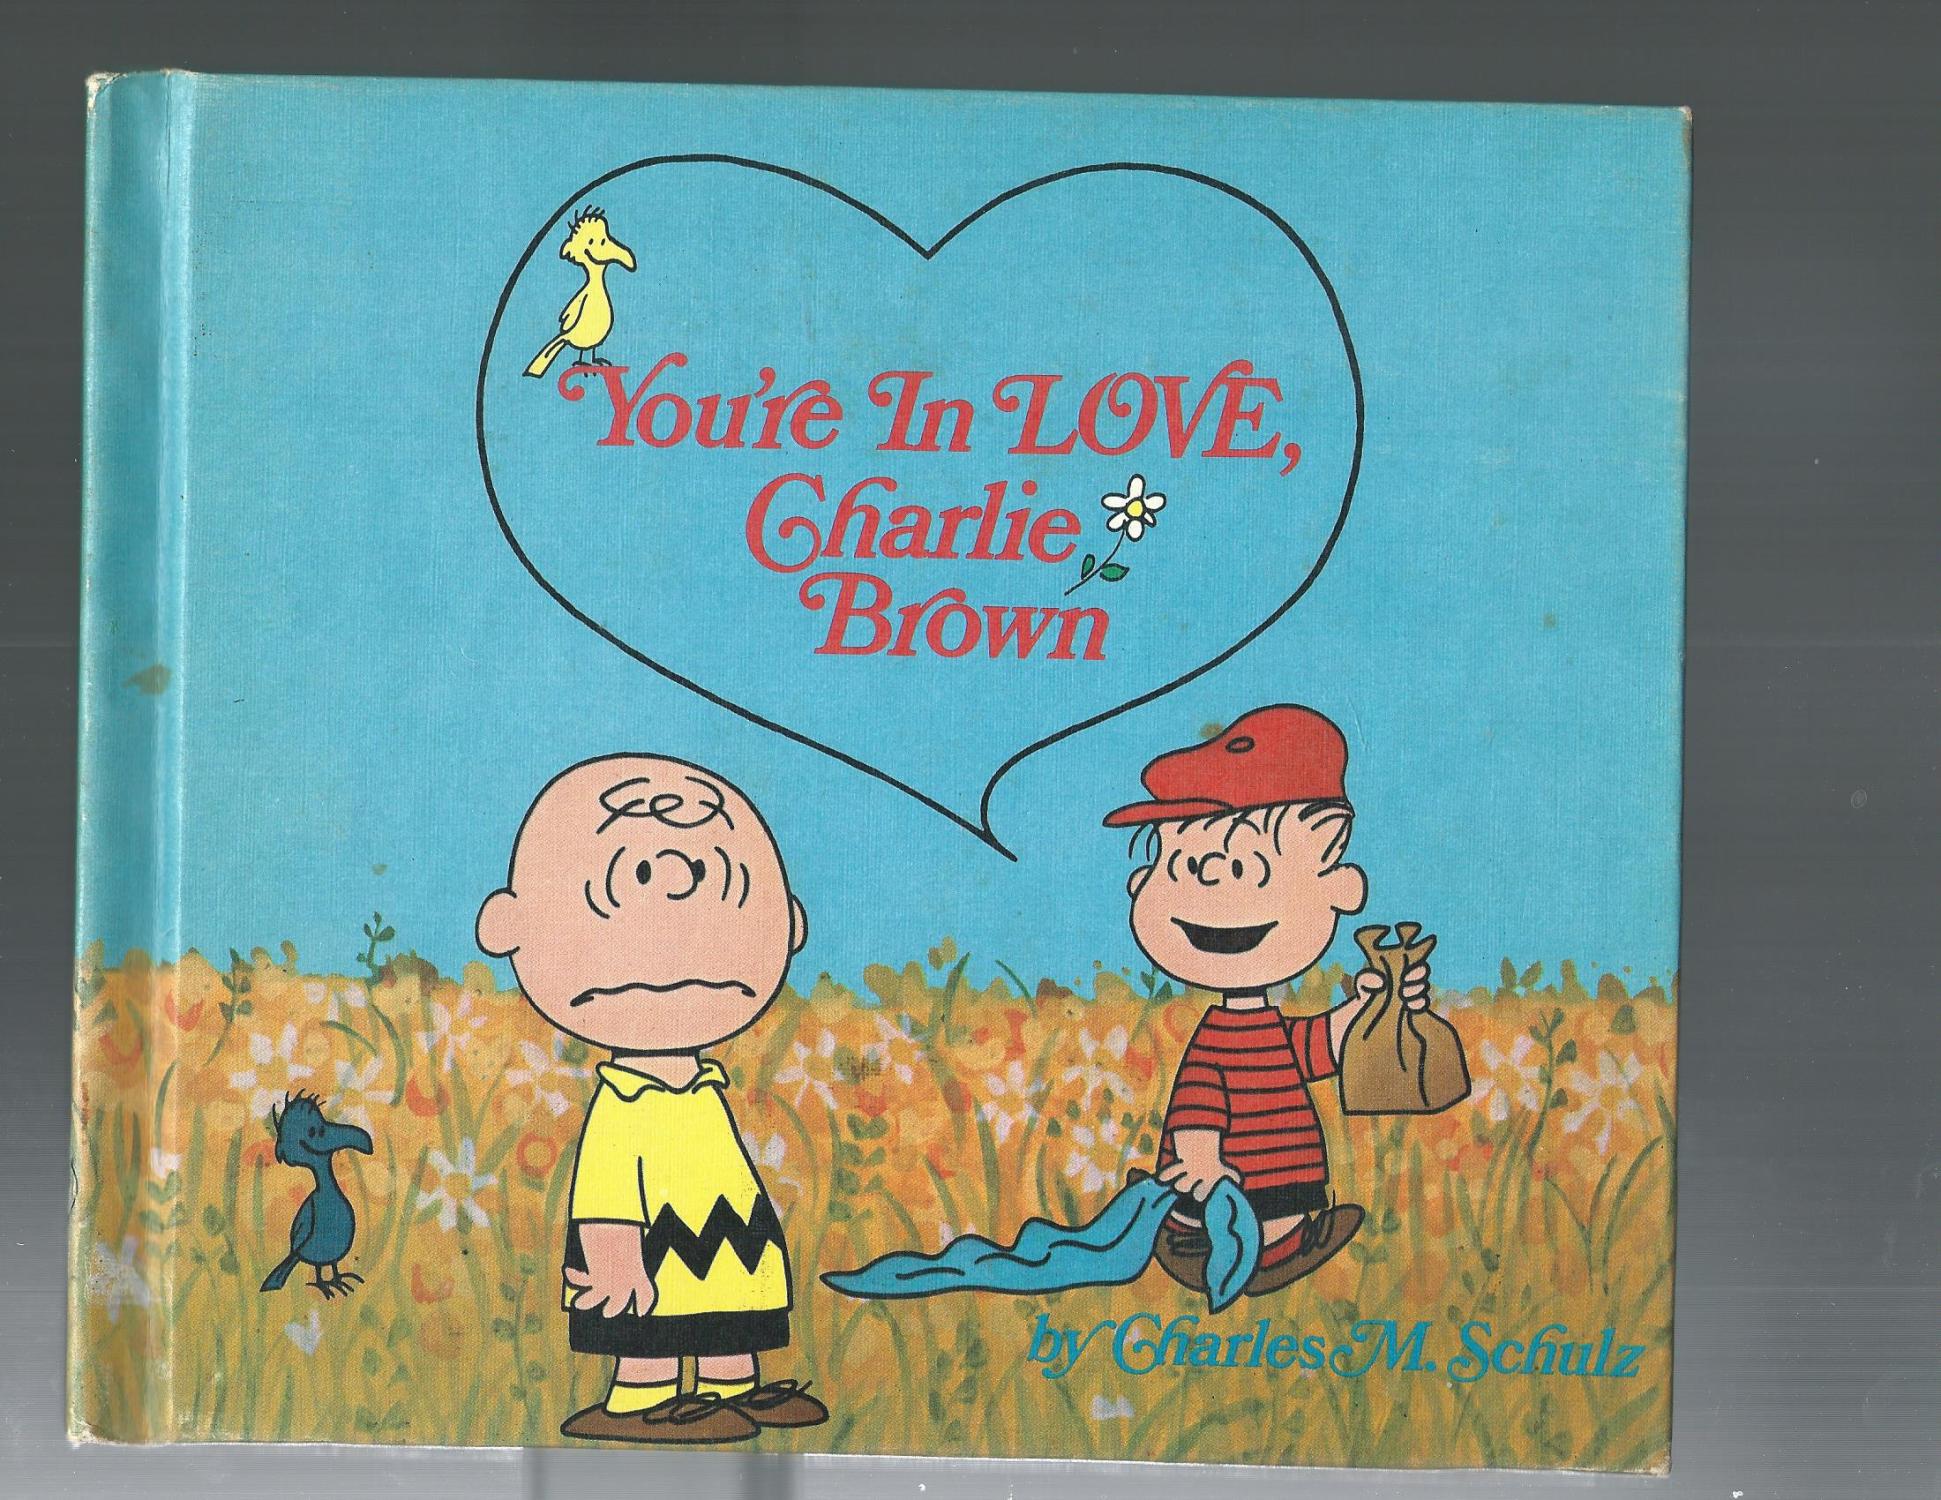 (1968)　ENDS　ODDS　YOU'RE　M.　IN　Near　Fine　LOVE　Charles　Edition　BOOKS　CHARLIE　BROWN　Hardcover　by　Schulz:　1st